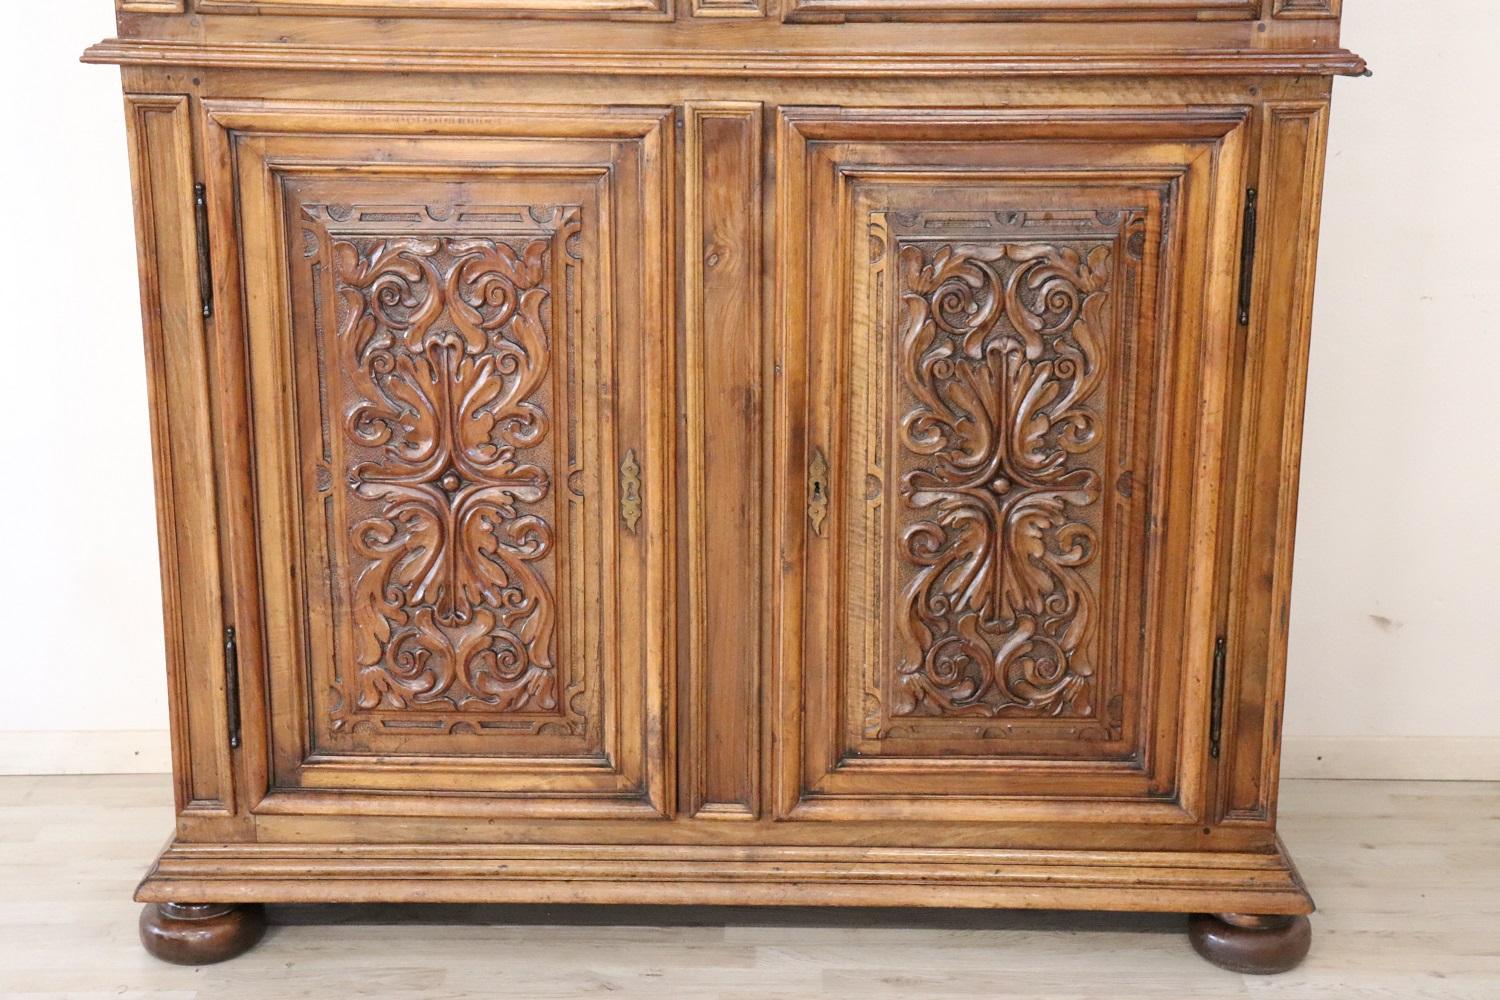 Important and rare antique solid walnut cabinet, 19th century. Characterized by a refined hand carving of the wood on the front doors. The fine walnut wood has acquired a beautiful old patina. Internally large useful space, equipped with shelves